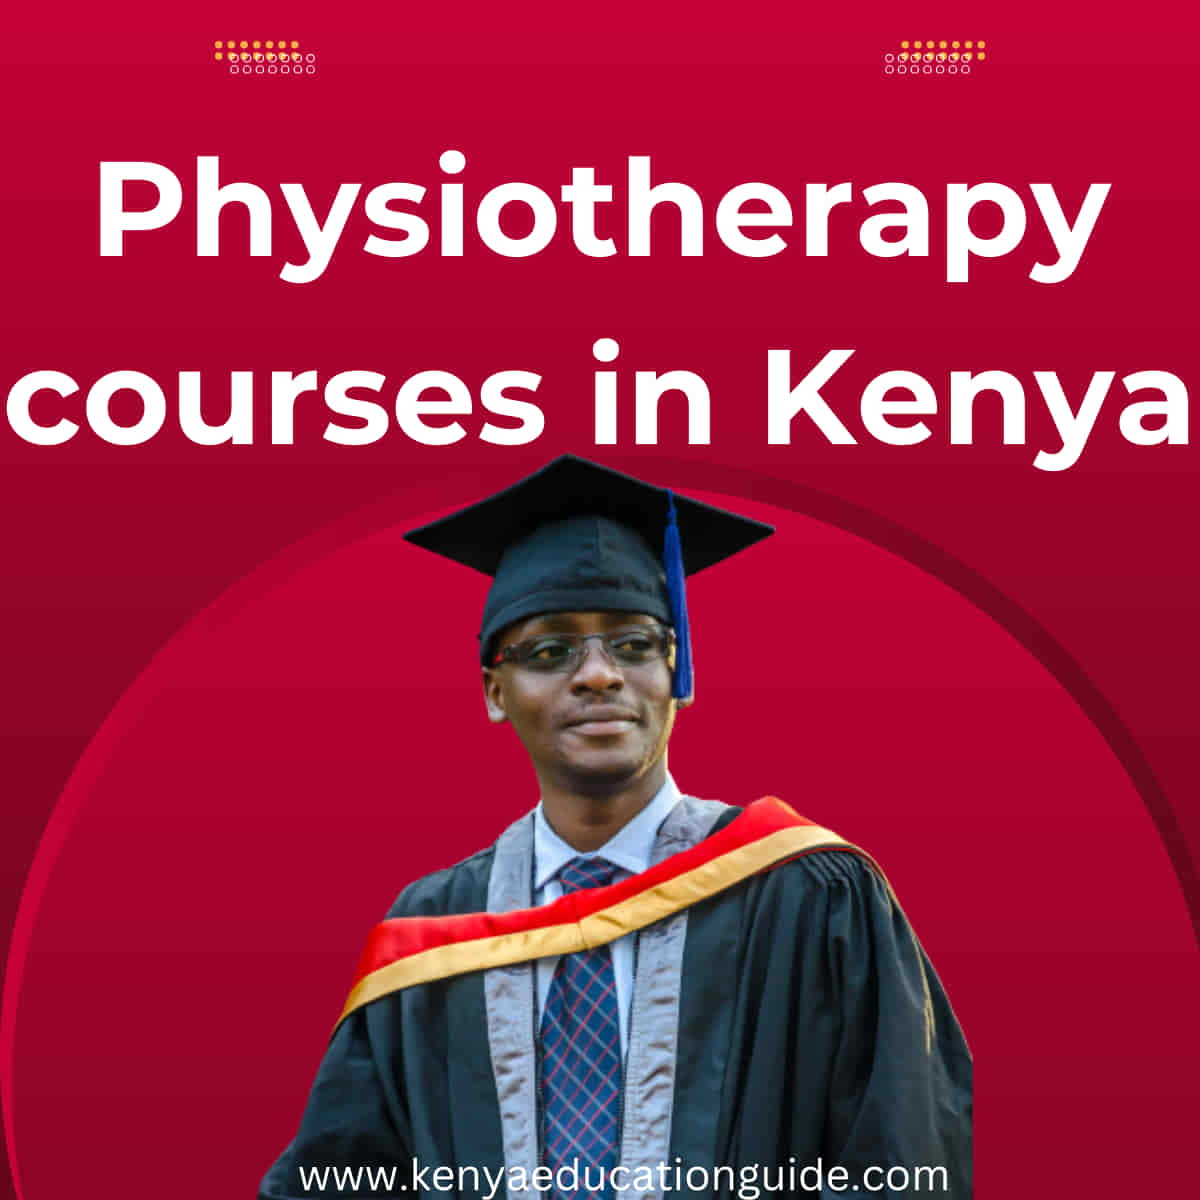 Physiotherapy courses in Kenya